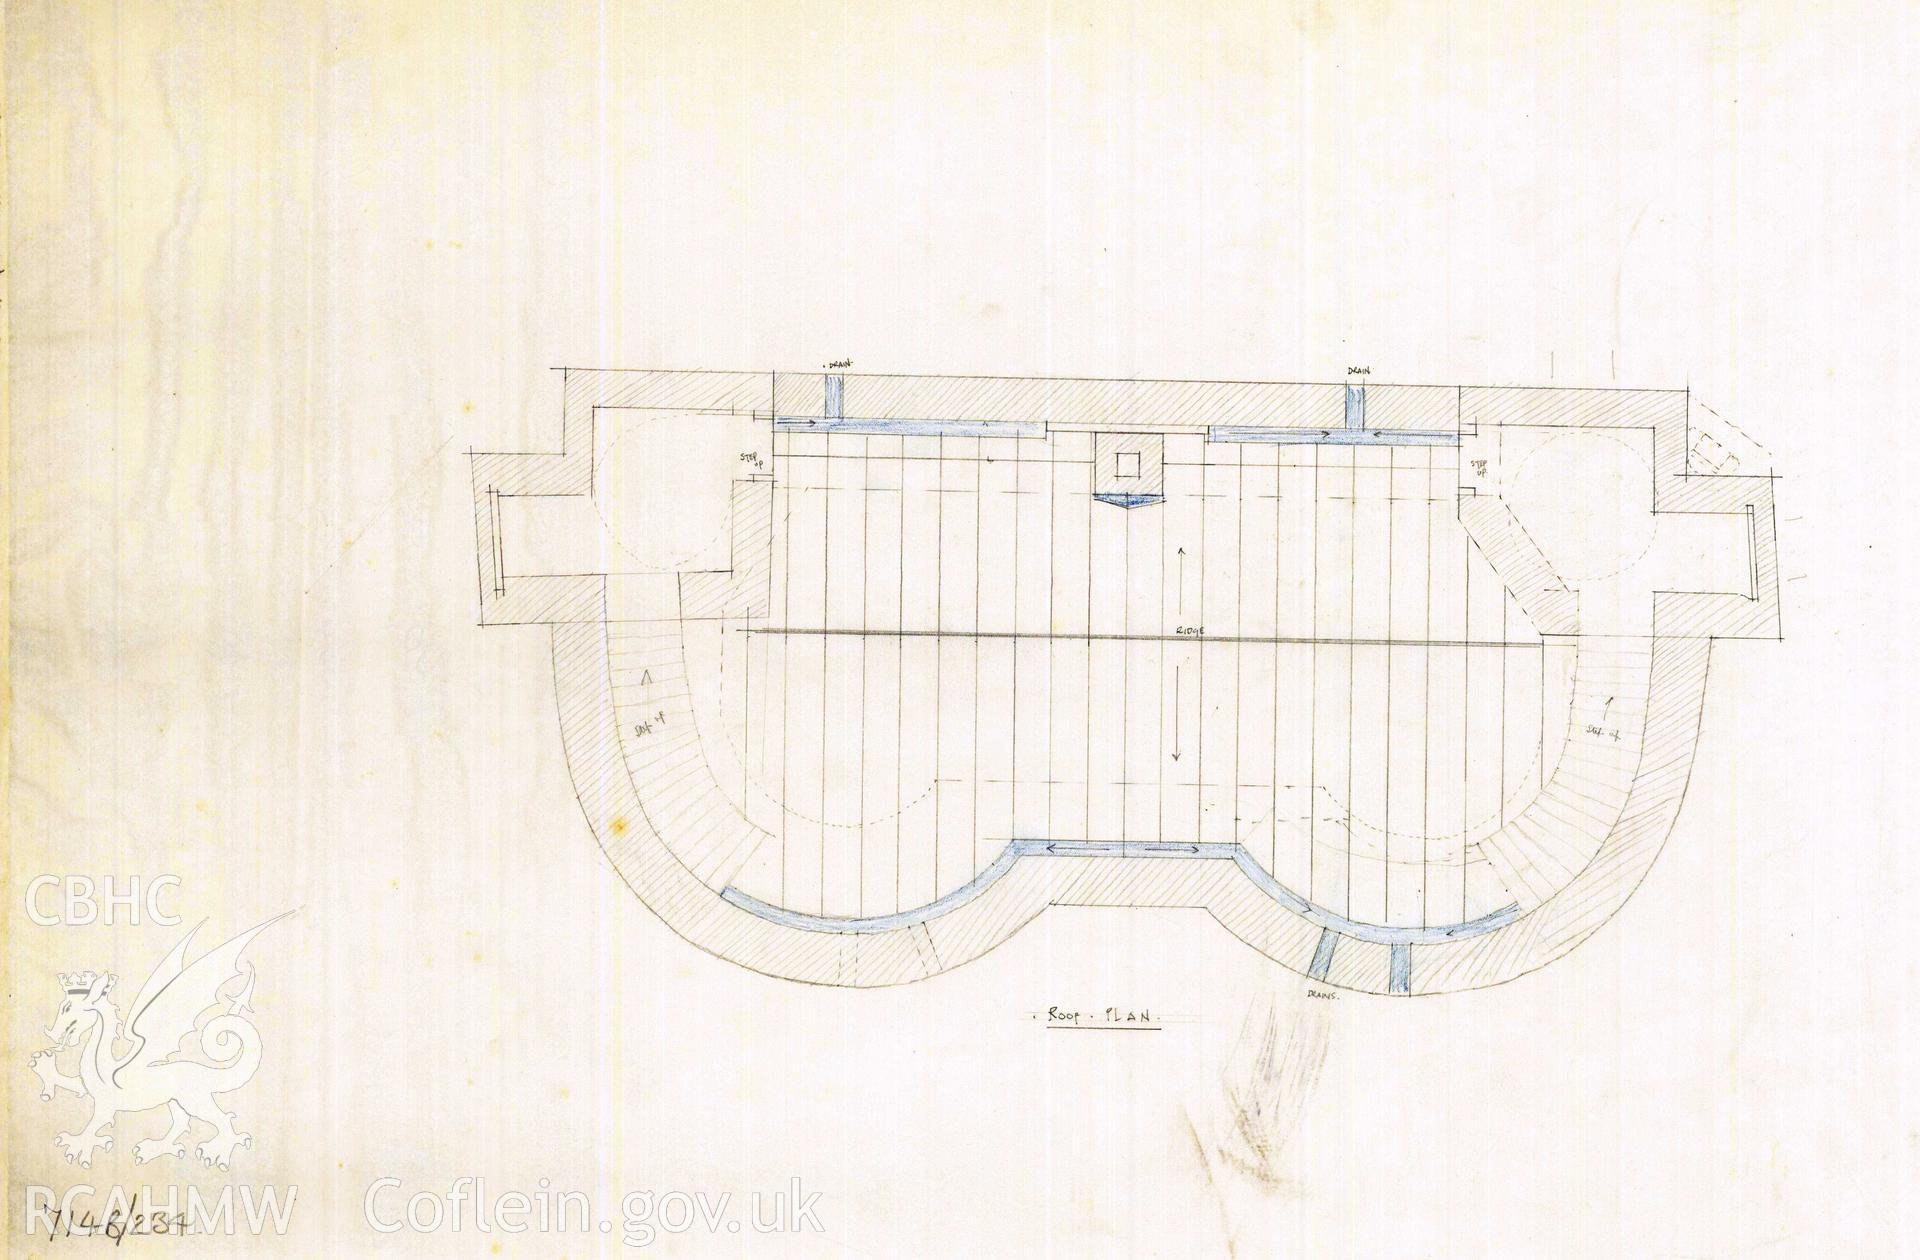 Cadw guardianship monument drawing of Caerphilly Castle. [Inner W gate, roof plan]. Cadw Ref. No:714B/234. Scale 1:48.